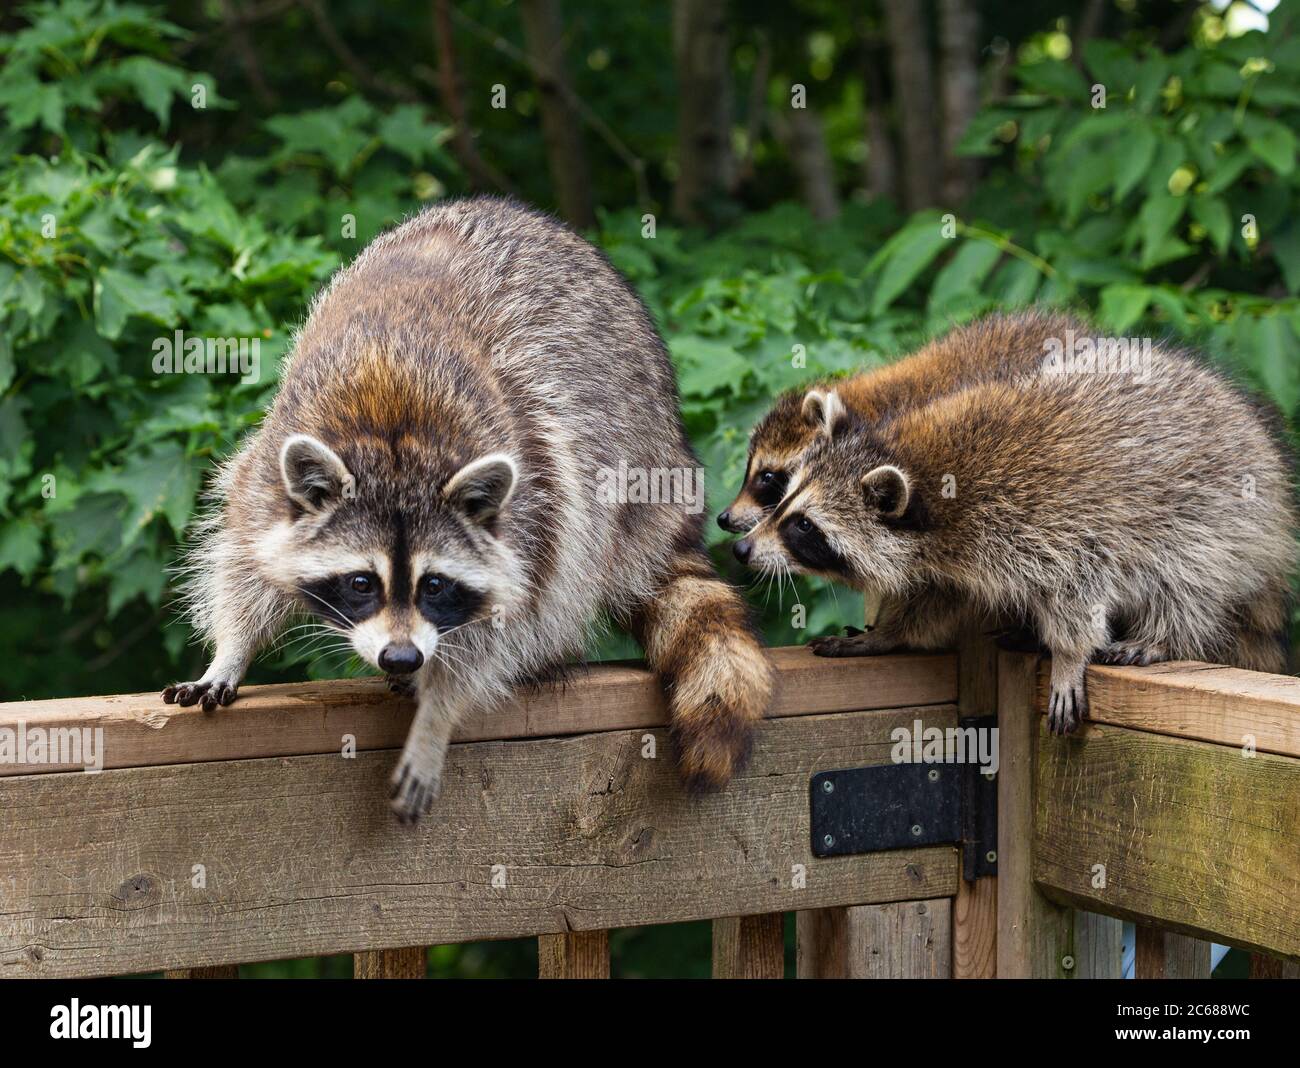 Mother and two baby raccoons perched on a wooden deck railing. Stock Photo